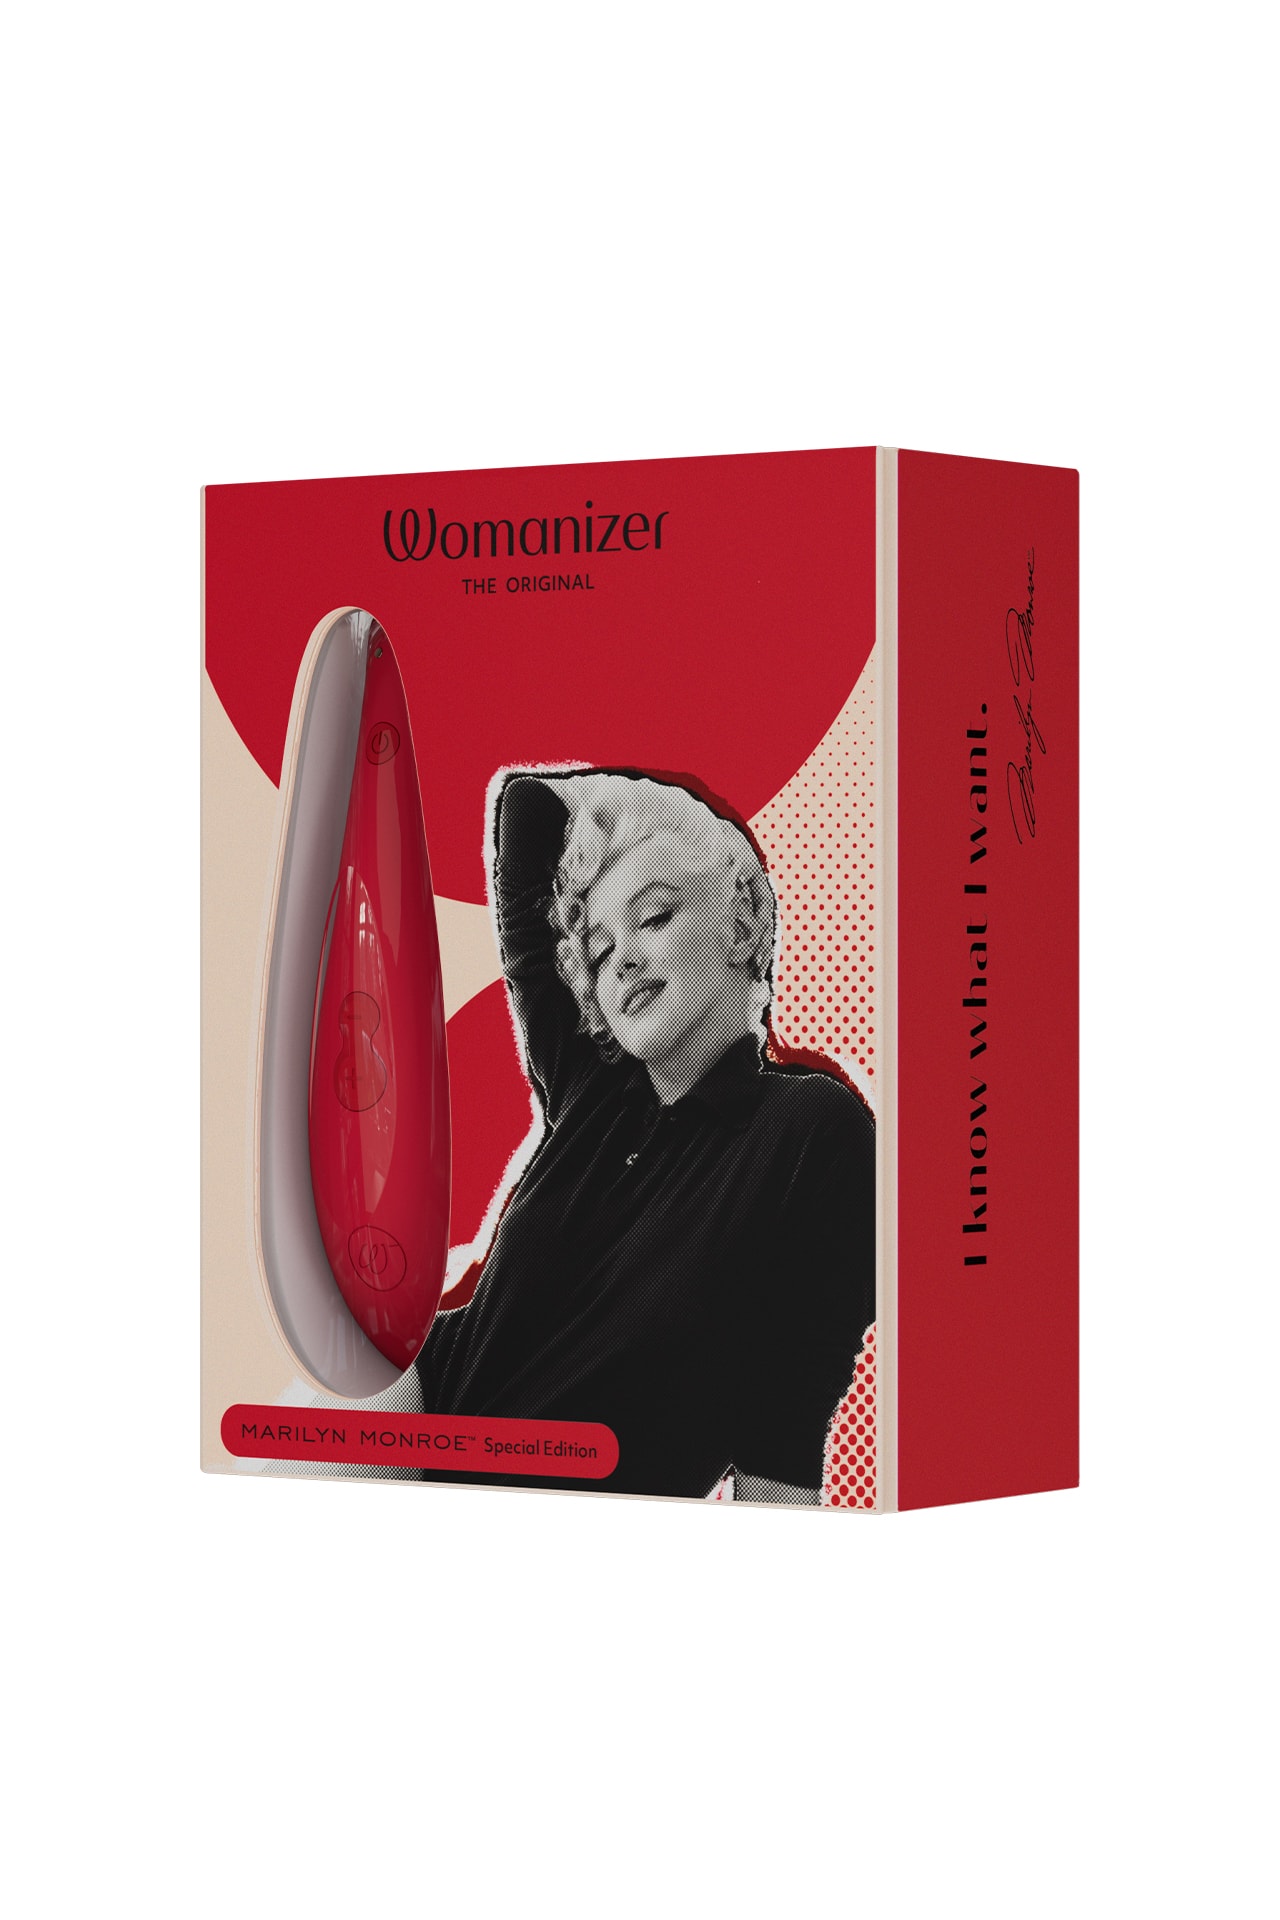 Marilyn Monroe collaboration womanizer sex toys classic 2